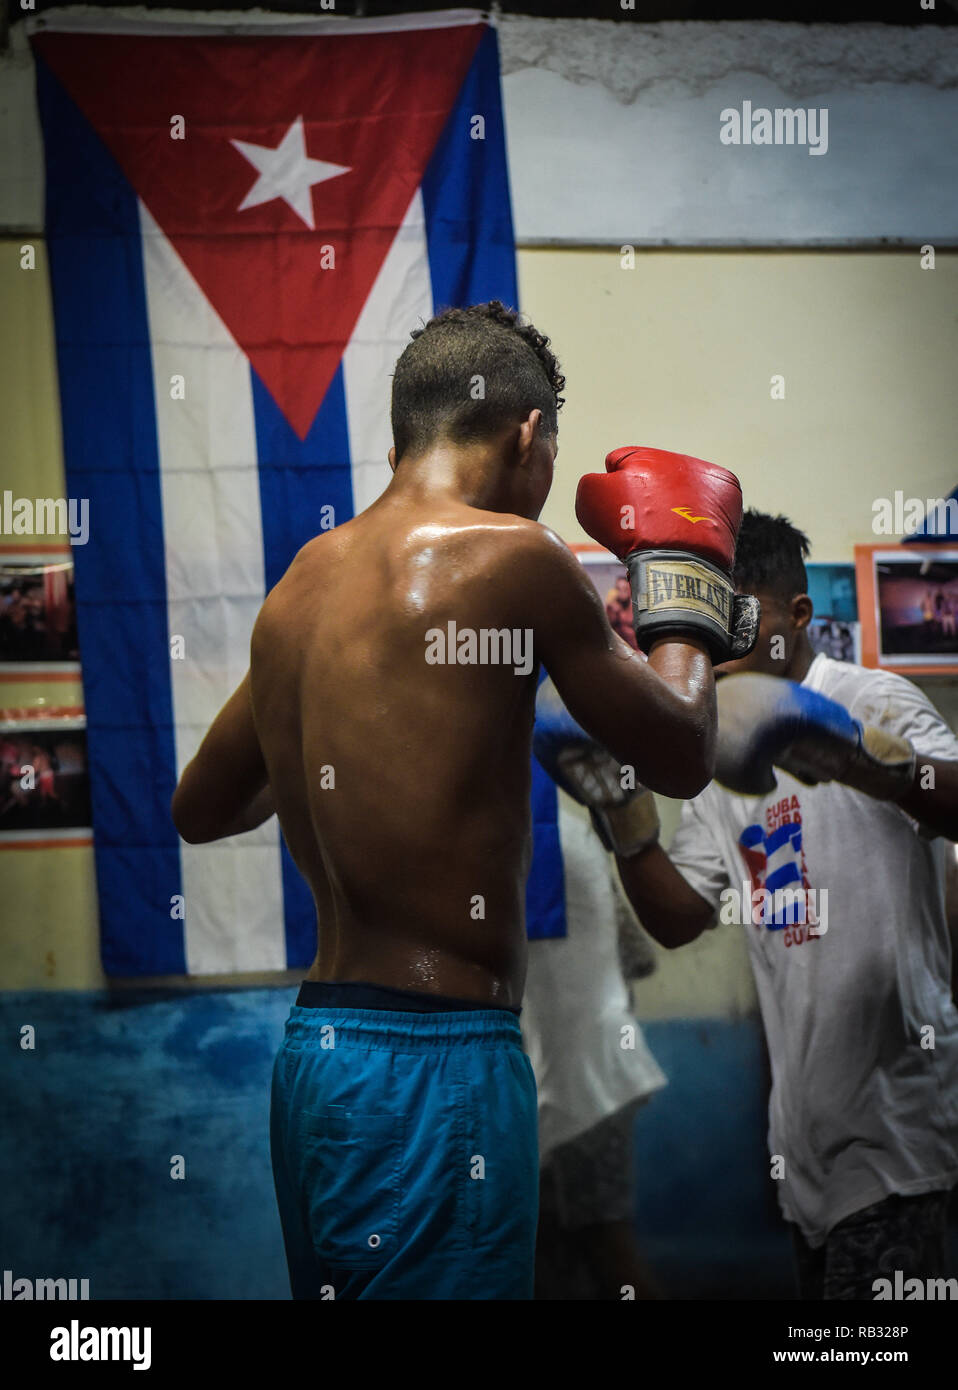 Havana, Havana, Cuba. 12th Oct, 2018. A Young boxer nicknamed ''La juventud'' The Youth, seen training at the Kid Chocolate gym in Havana, Cuba.Cuban boxers are the most successful in the history of amateur boxing, Cuba has won 32 Olympic boxing gold medals since 1972, .In 1962, professional boxing in Cuba was banned by Fidel Castro. As a consequence of Castro's ban, if fighters want to pursue their dream of becoming world champions they have to make the heartbreaking decision to defect from the country and It can be very tough for them because they are excommunicated and separated from Stock Photo